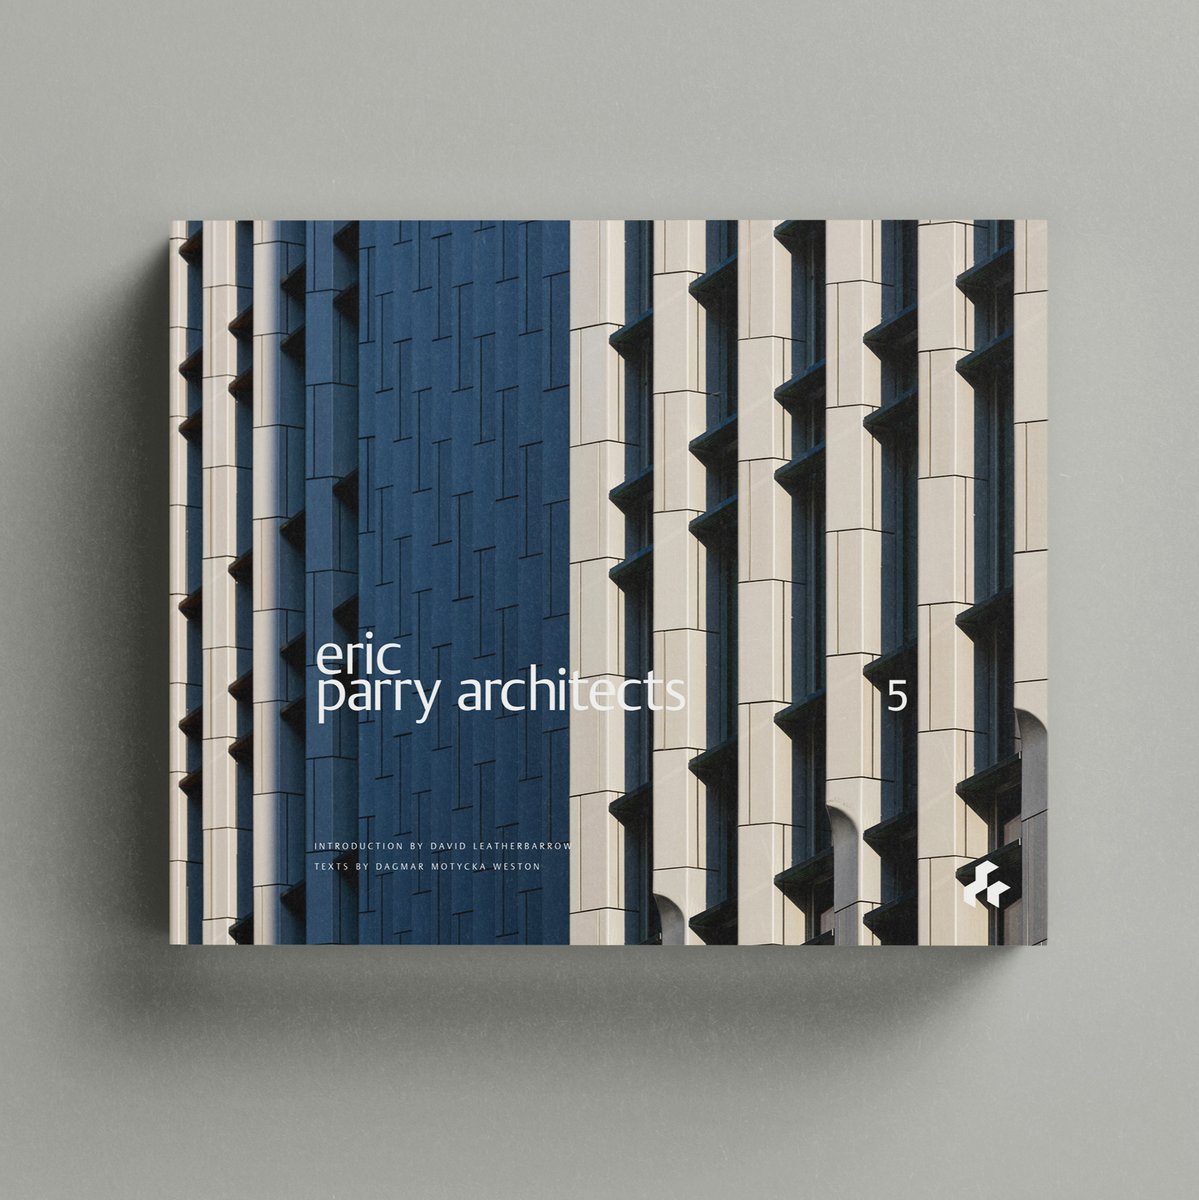 We are thrilled to announce the launch of ‘Eric Parry Architects Volume 5’, presenting the recent cultural, residential and commercial projects of one of the UK’s leading architectural practices.
 
Available now at the link in bio.
 
#ArtificePress #EricParryArchitects